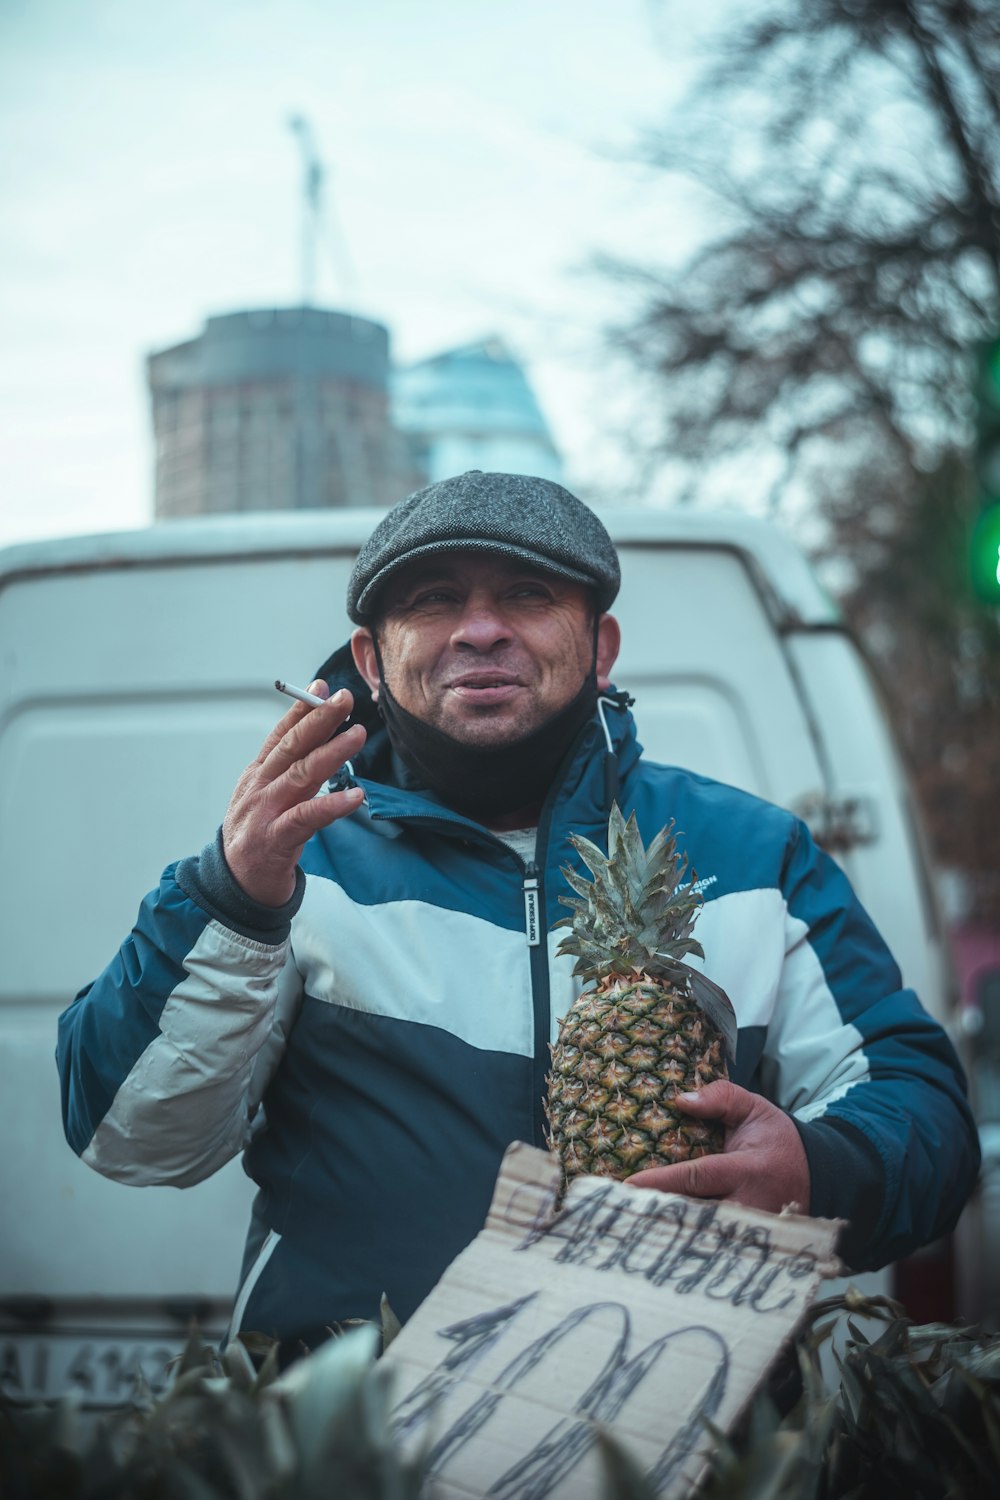 man in blue jacket and gray knit cap holding pineapple fruit